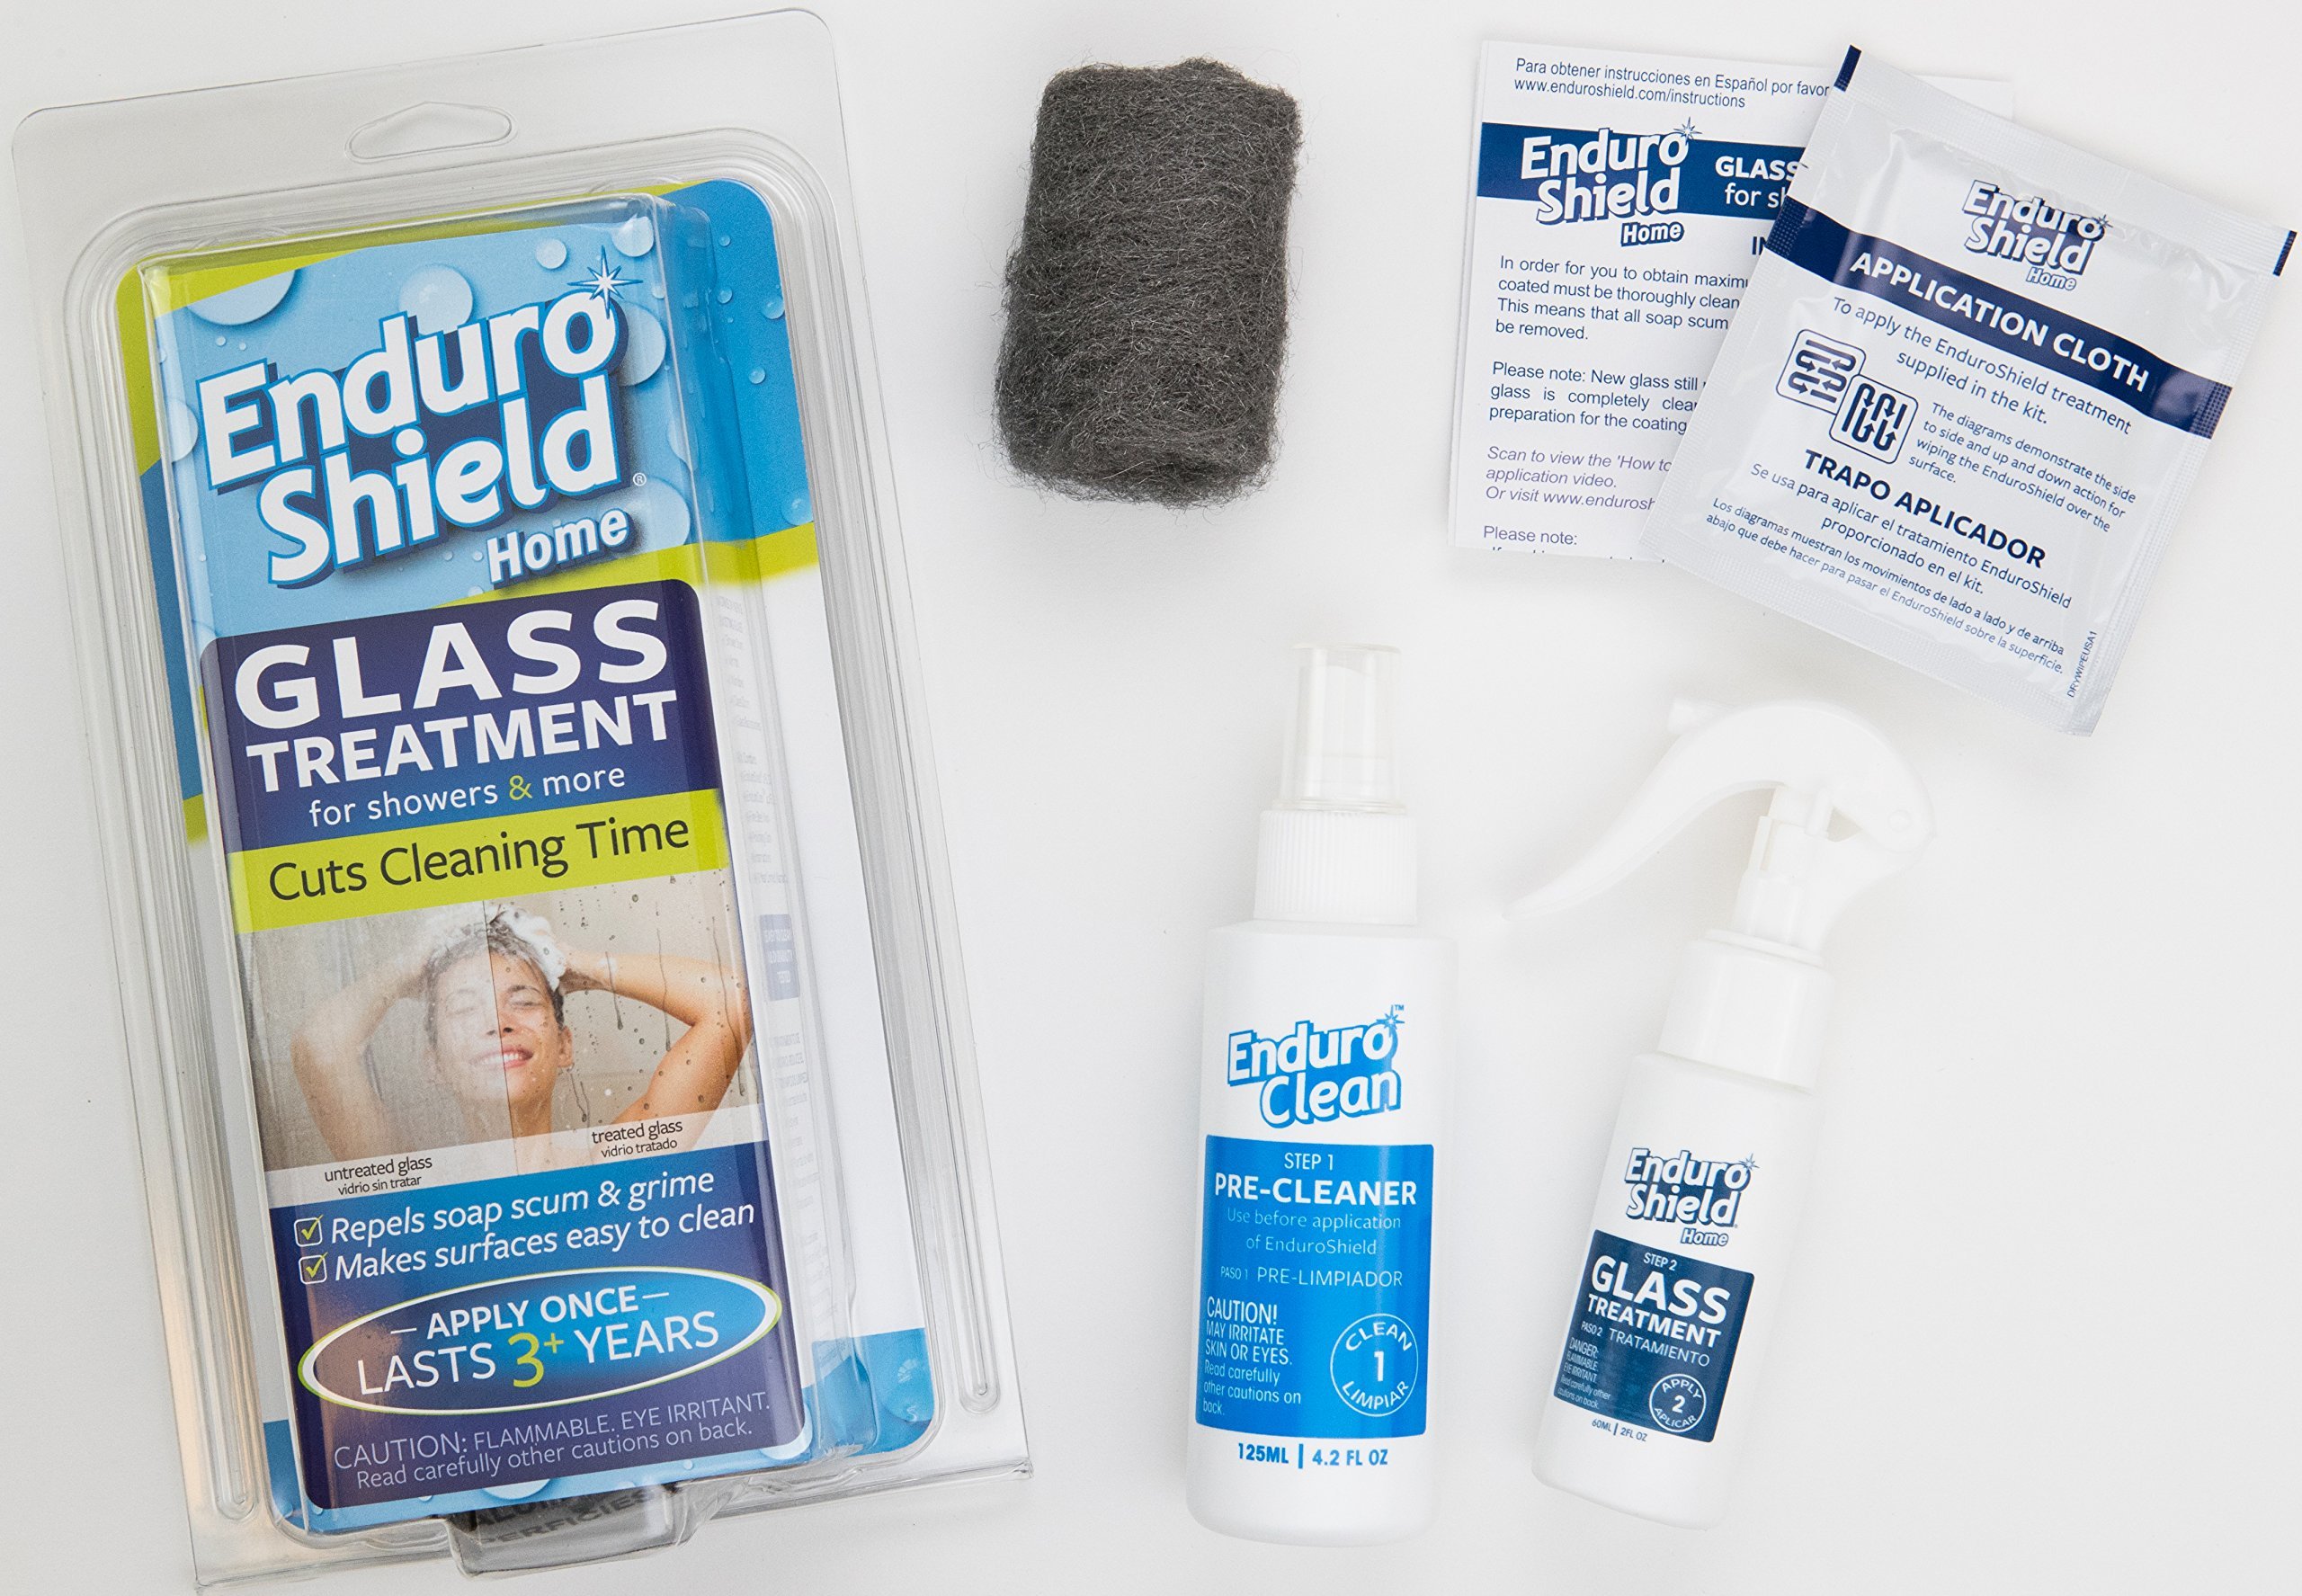 Enduroshield Home Treatment 2 oz Kit for Showers & More -One Application Protects, Makes Glass Easier to Clean for 3 Years.